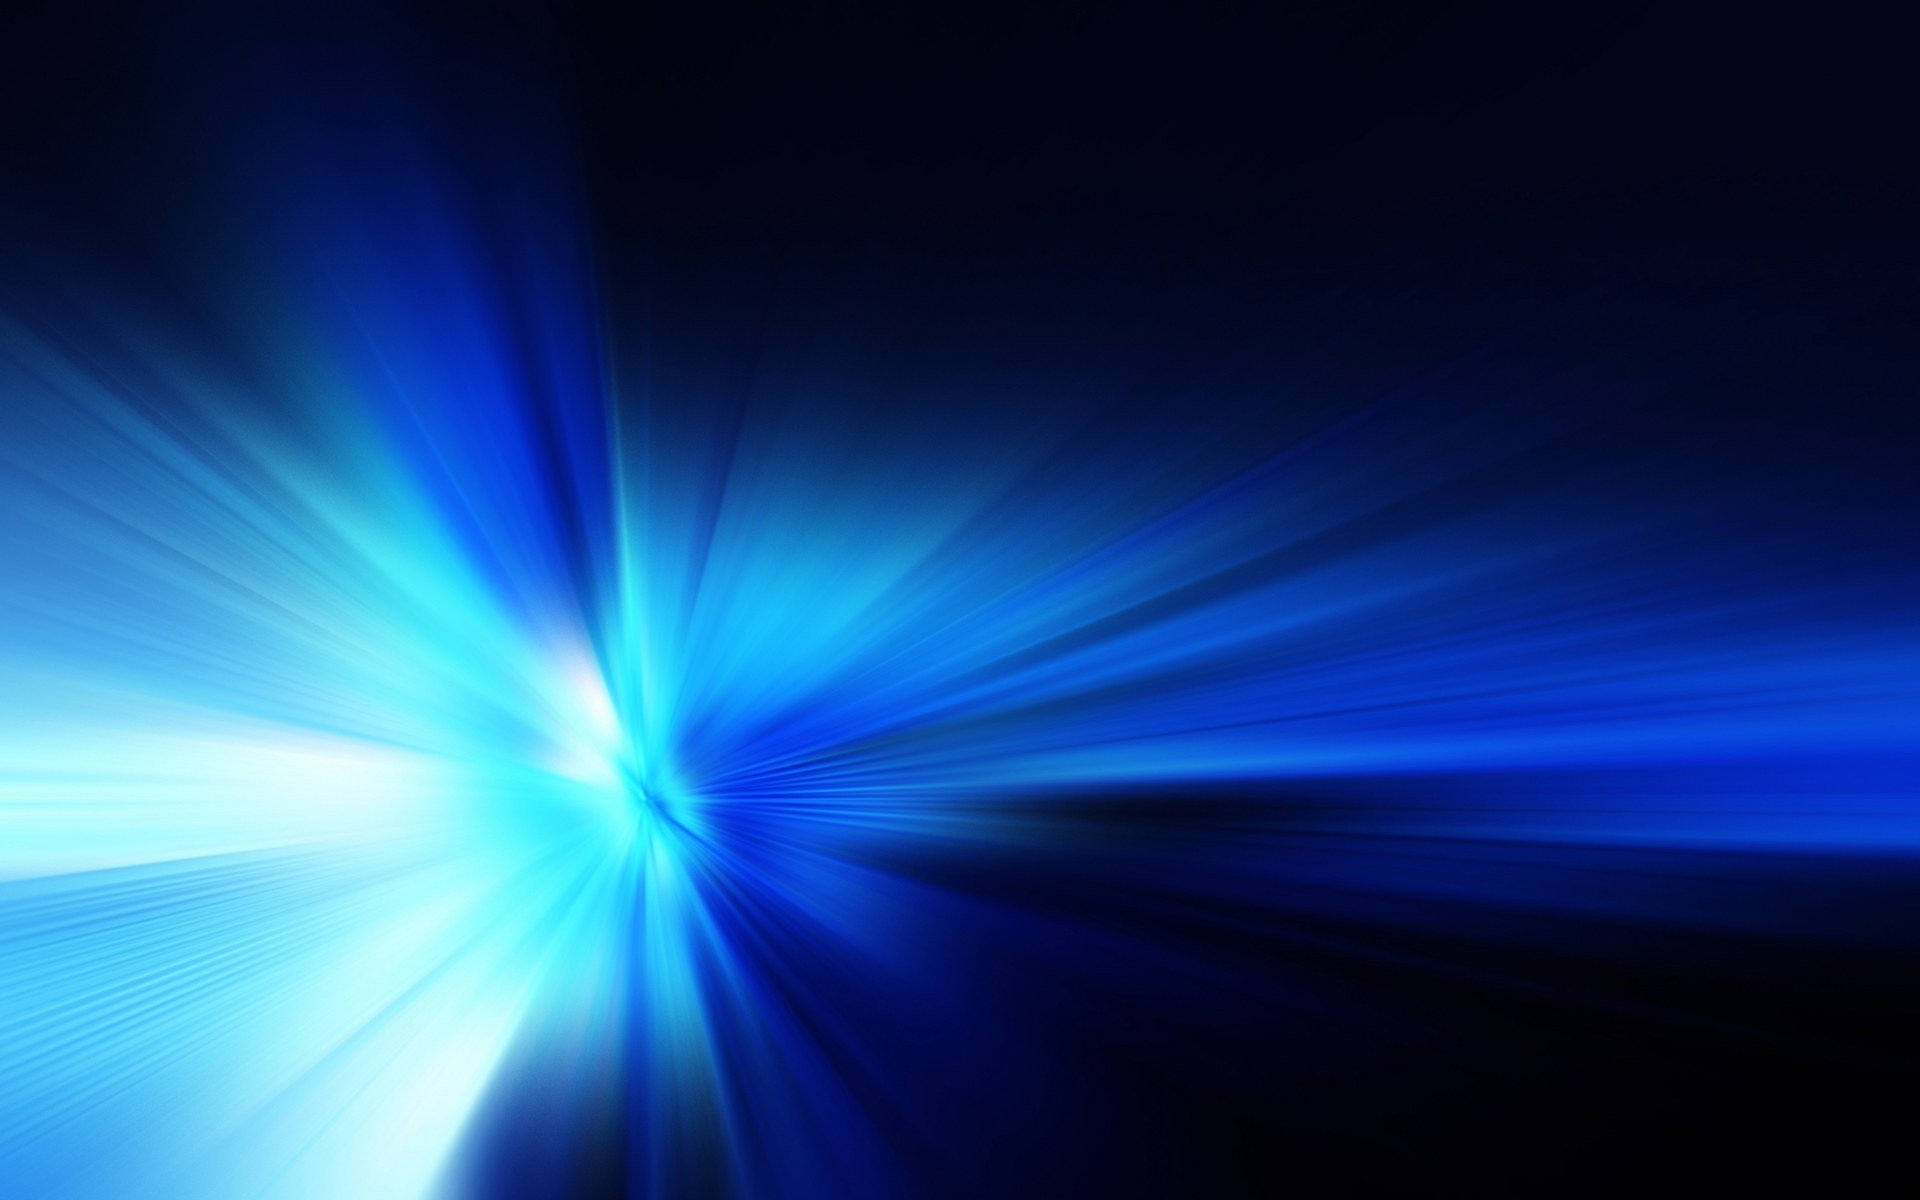 Abstract Backgrounds Blue 2946 Hd Wallpapers in Abstract   Imagesci 1920x1200